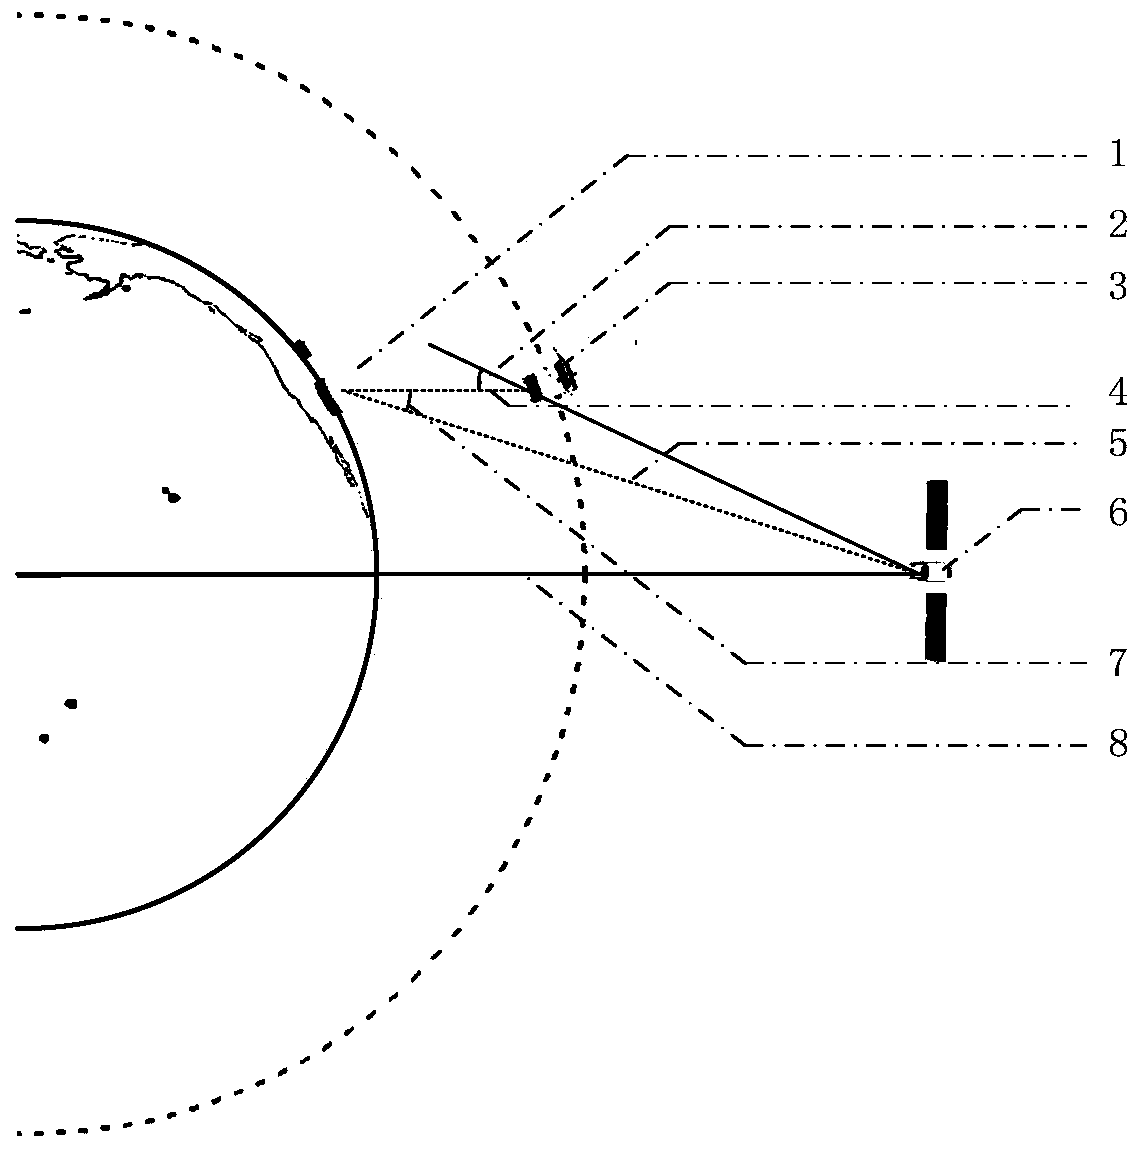 Low-orbit constellation GEO frequency interference avoidance method based on multiple coverage